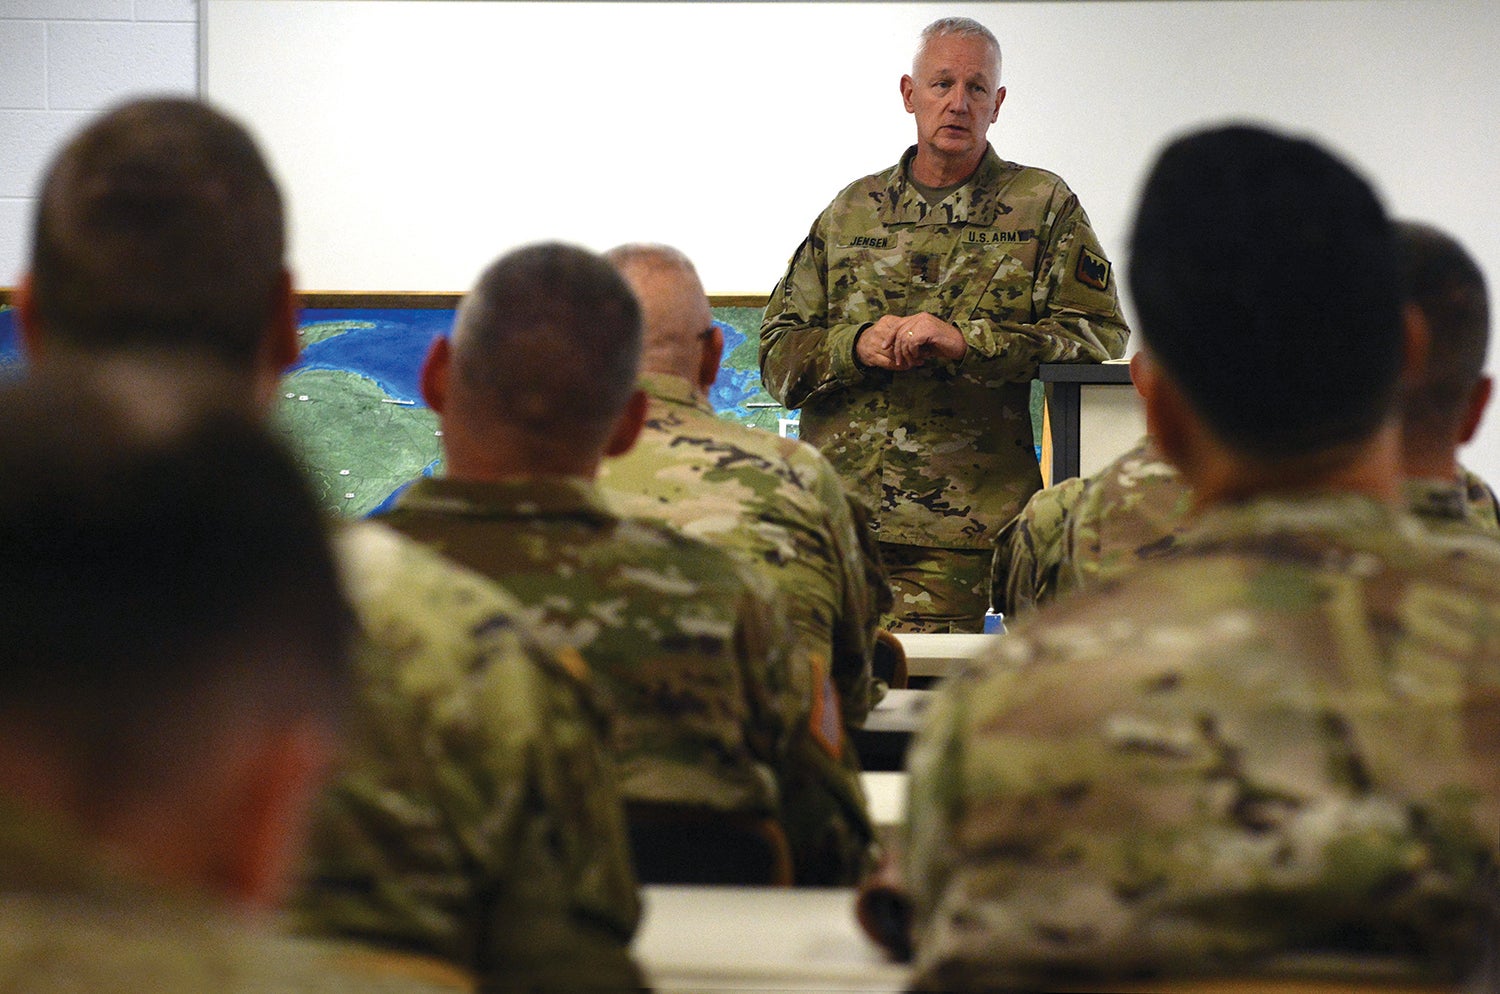 Lt. Gen. Jon Jensen, director of the Army National Guard, talks with soldiers taking part in an exercise at Camp Grayling Joint Maneuver Training Center, Michigan. (Credit: Army National Guard/Sgt. 1st Class Jon Soucy)